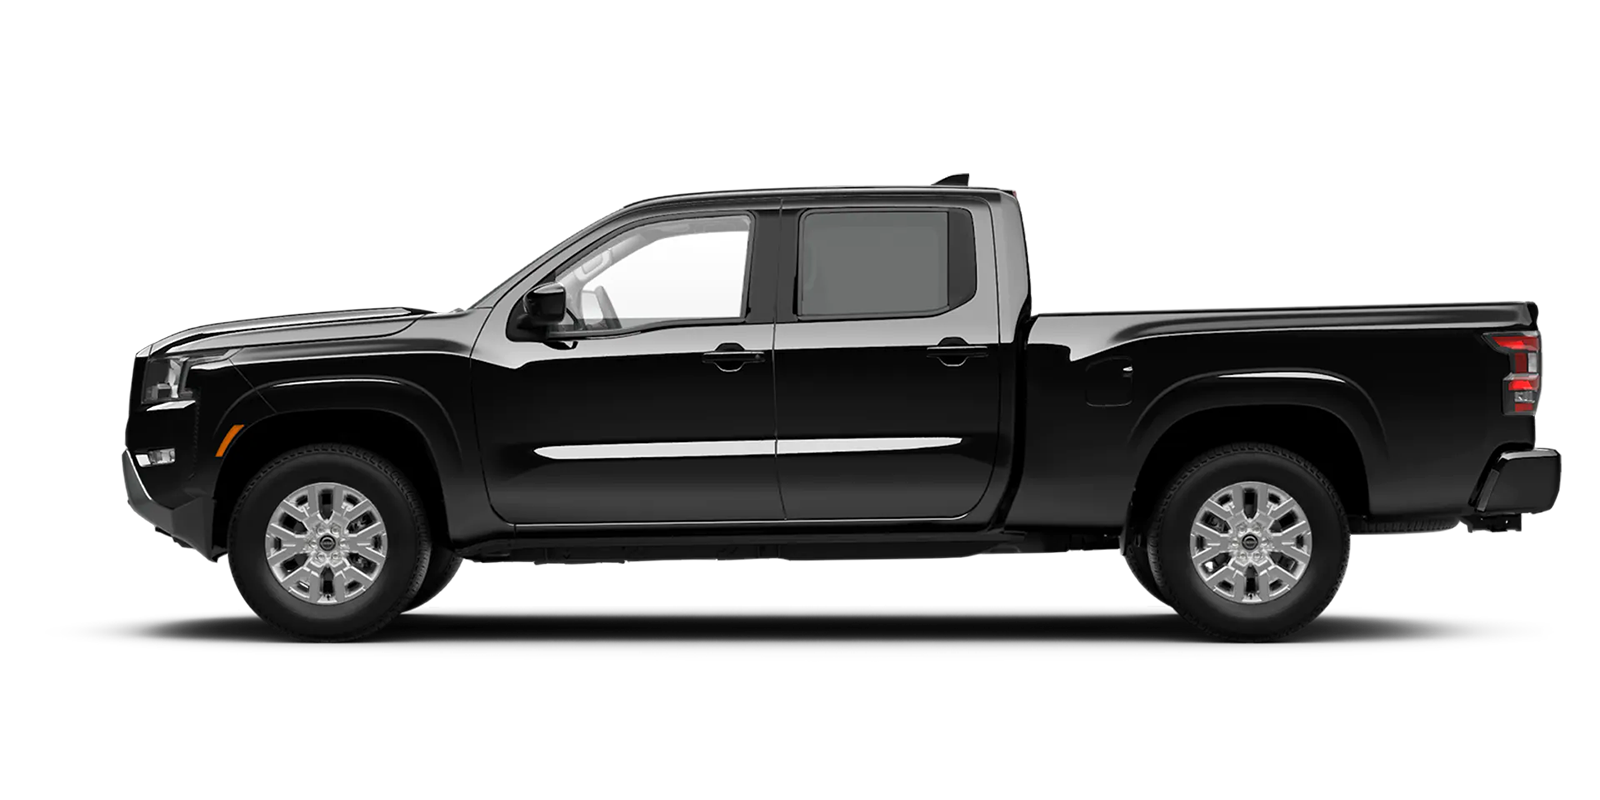 2022 Frontier Crew Cab Long Bed SV 4x4 in Super Black | Rolling Hills Nissan in Saint Joseph MO